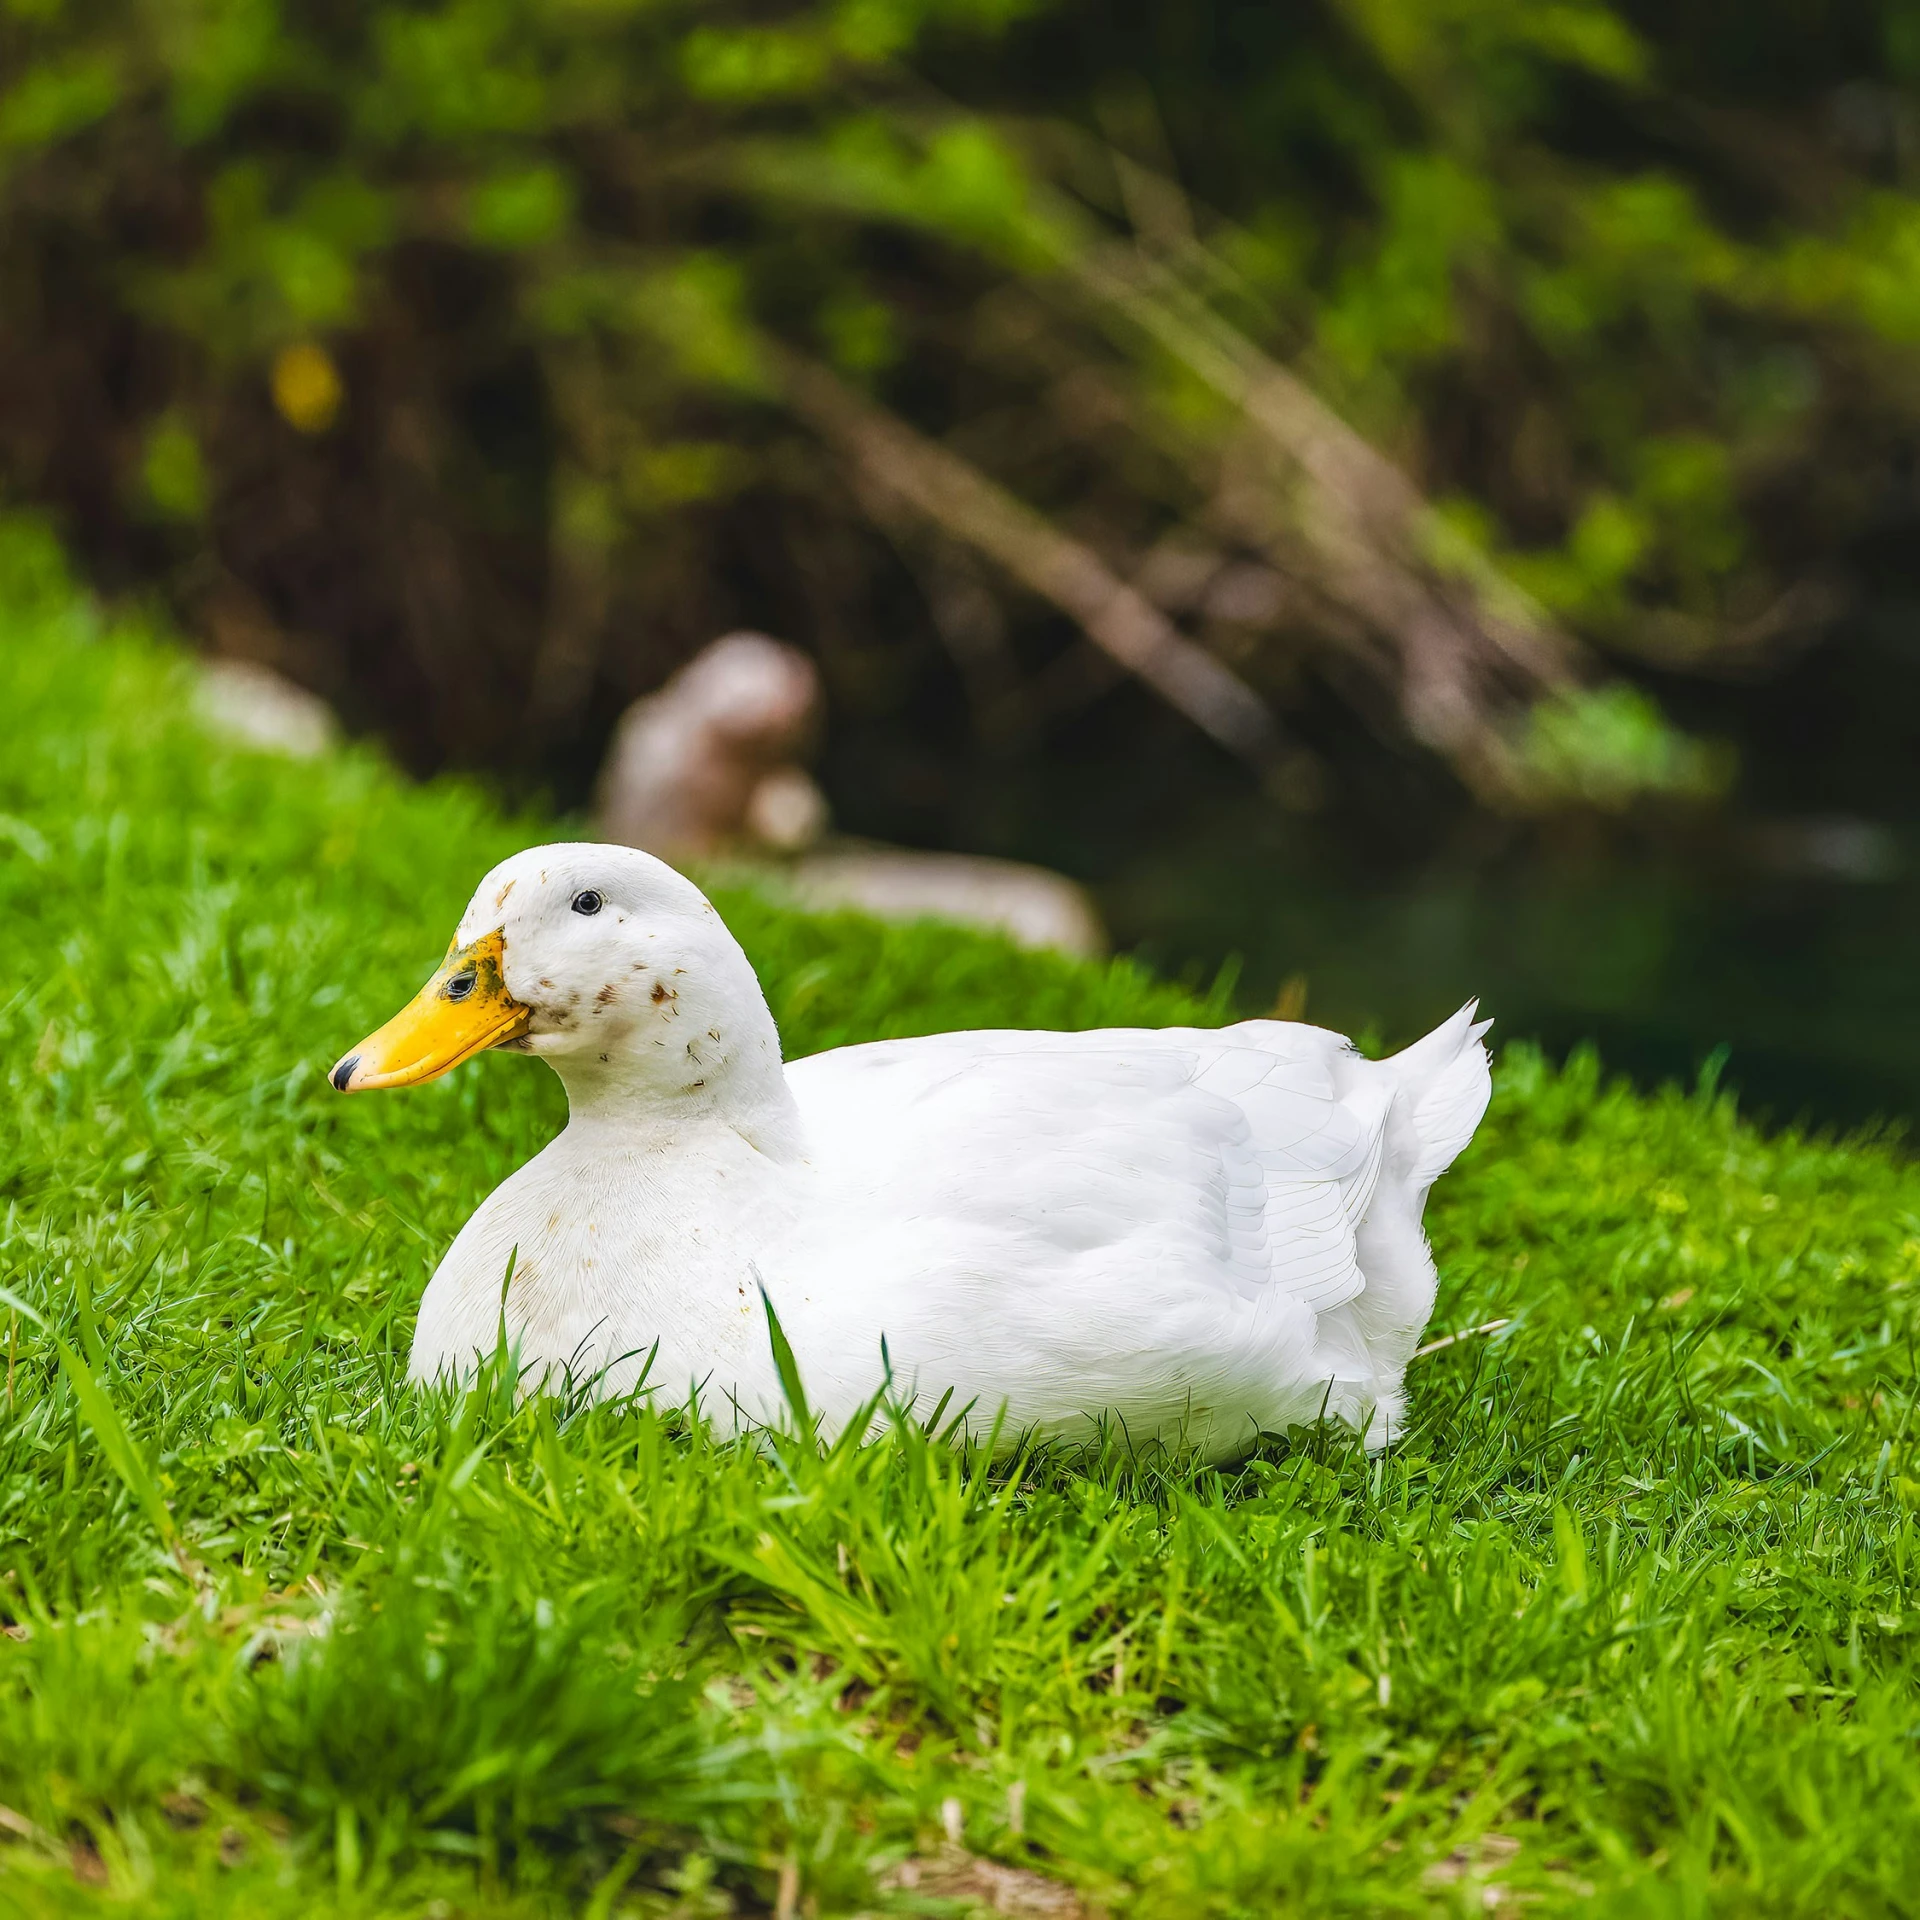 a white duck in the grass by some water